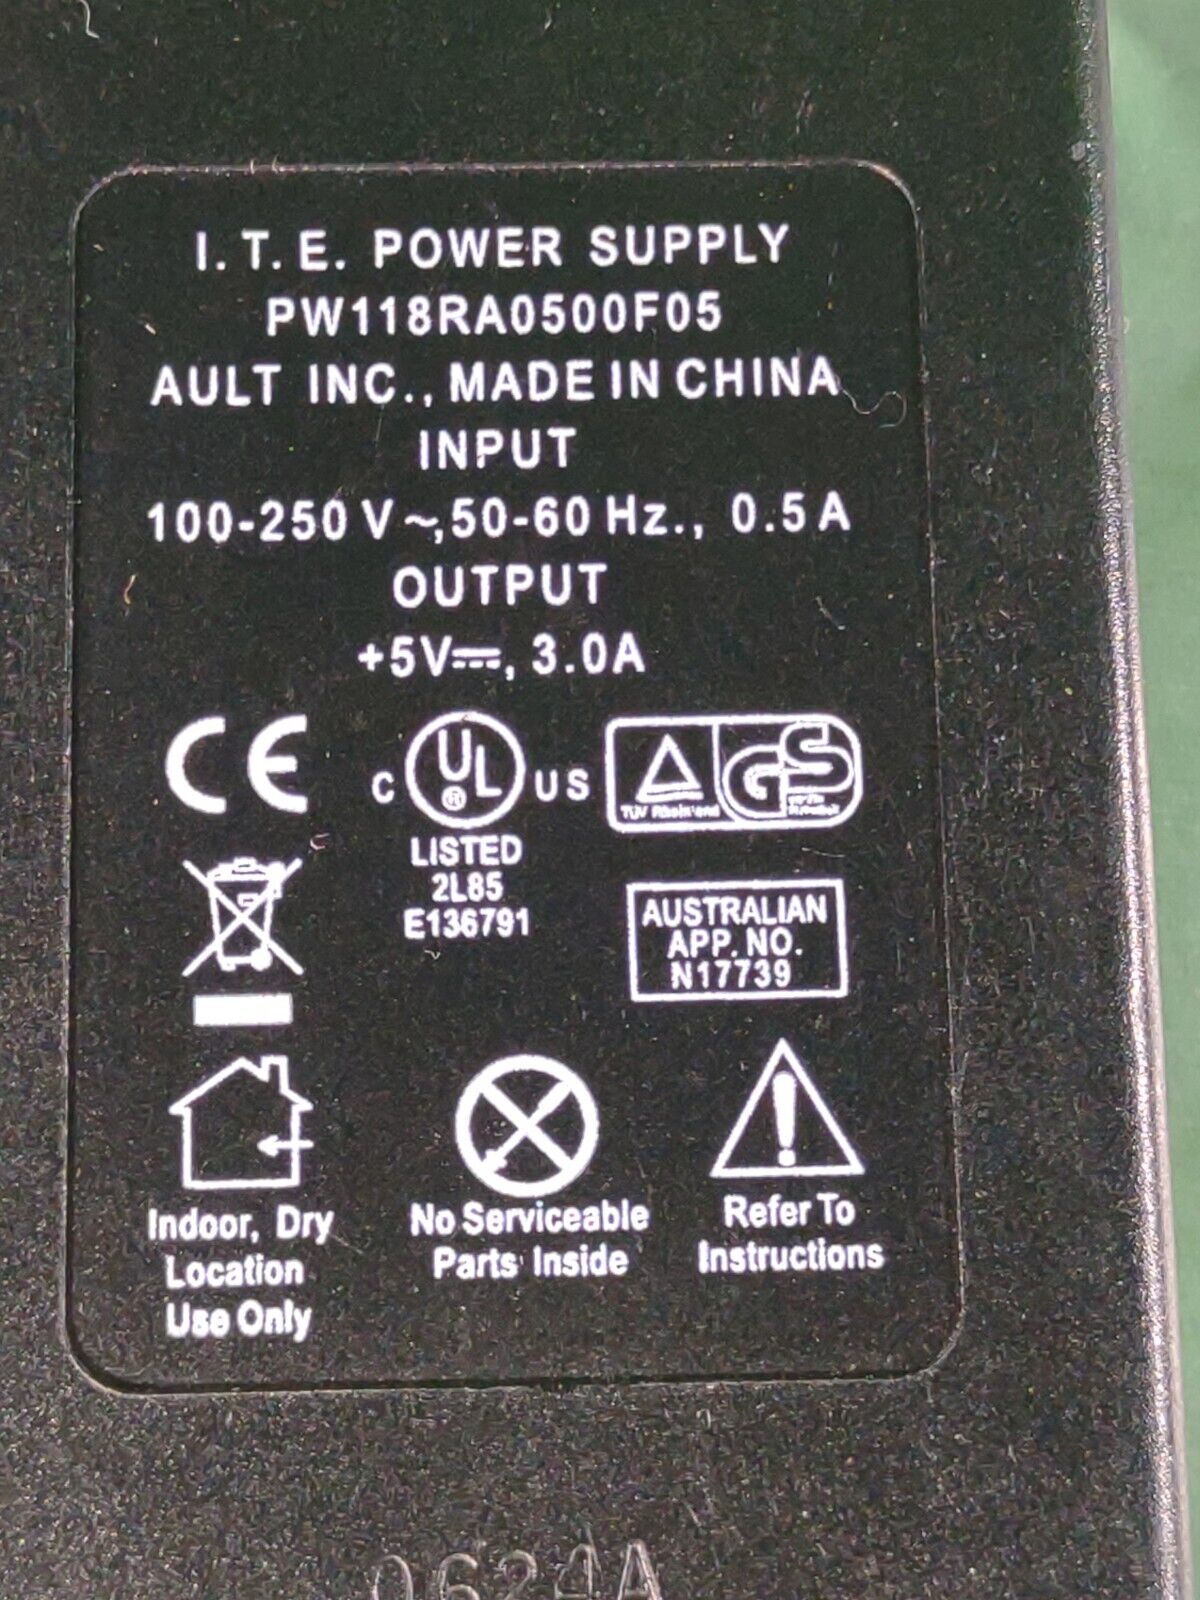 *Brand NEW*Genuine Ault I.T.E. PW118 5V 3A AC Adapter pw118ra0500f05 Power Supply